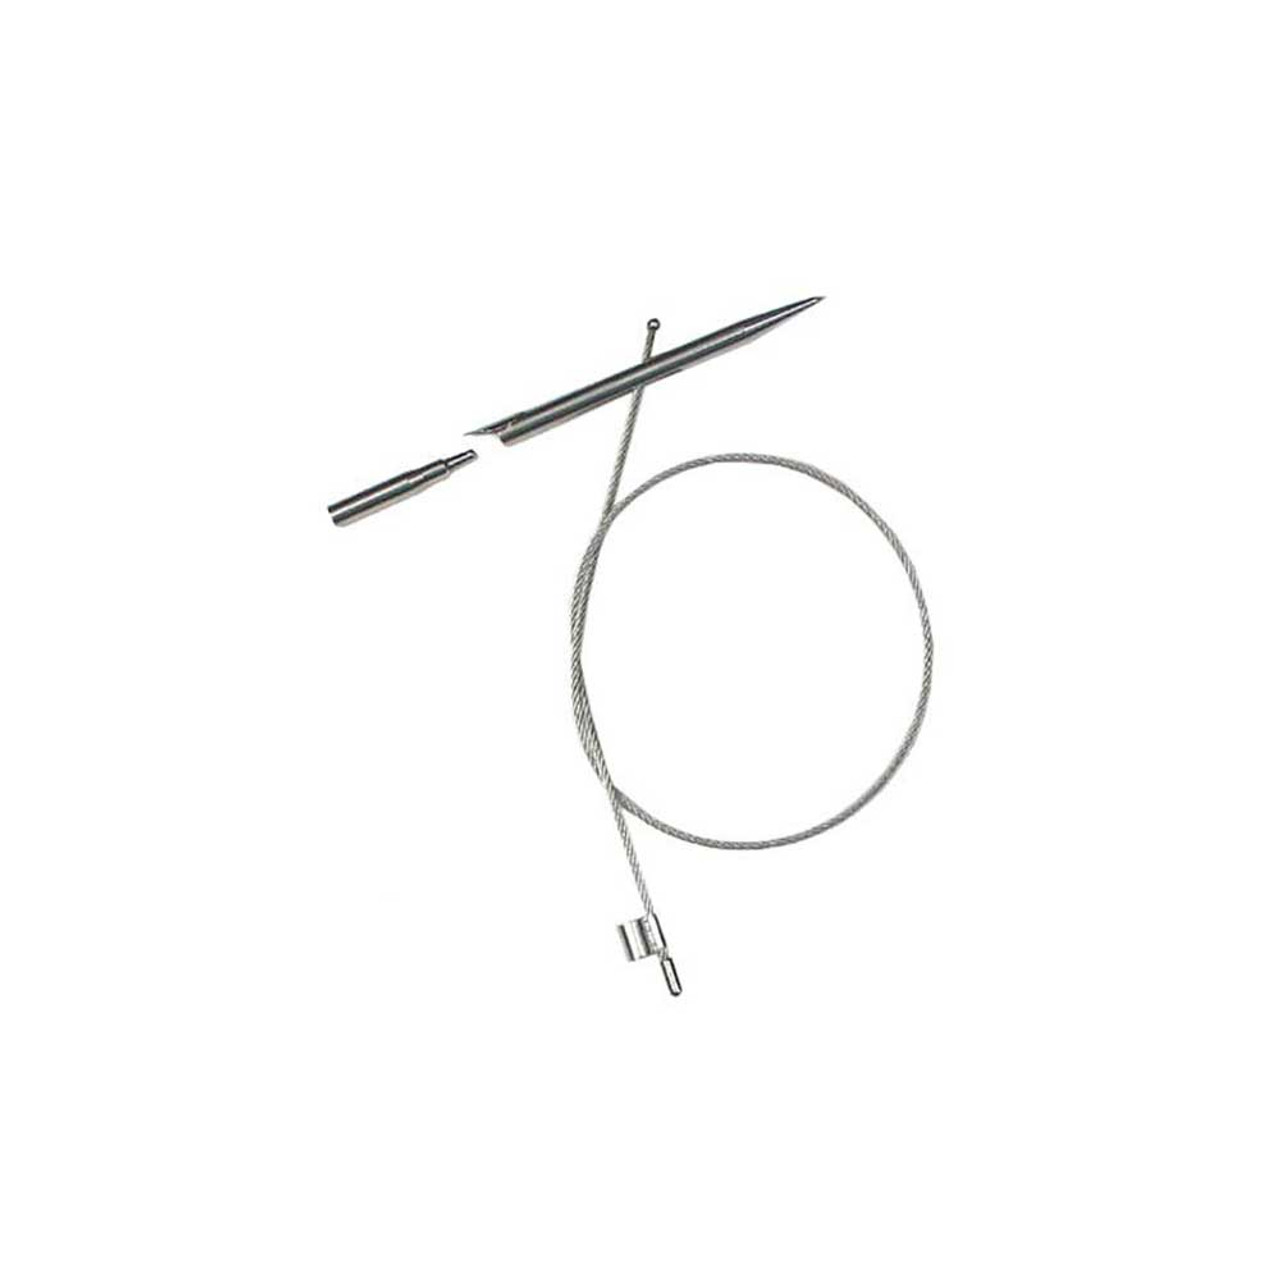 Slip Tip for Pole Spear 6mm Threading 13 with steel cable